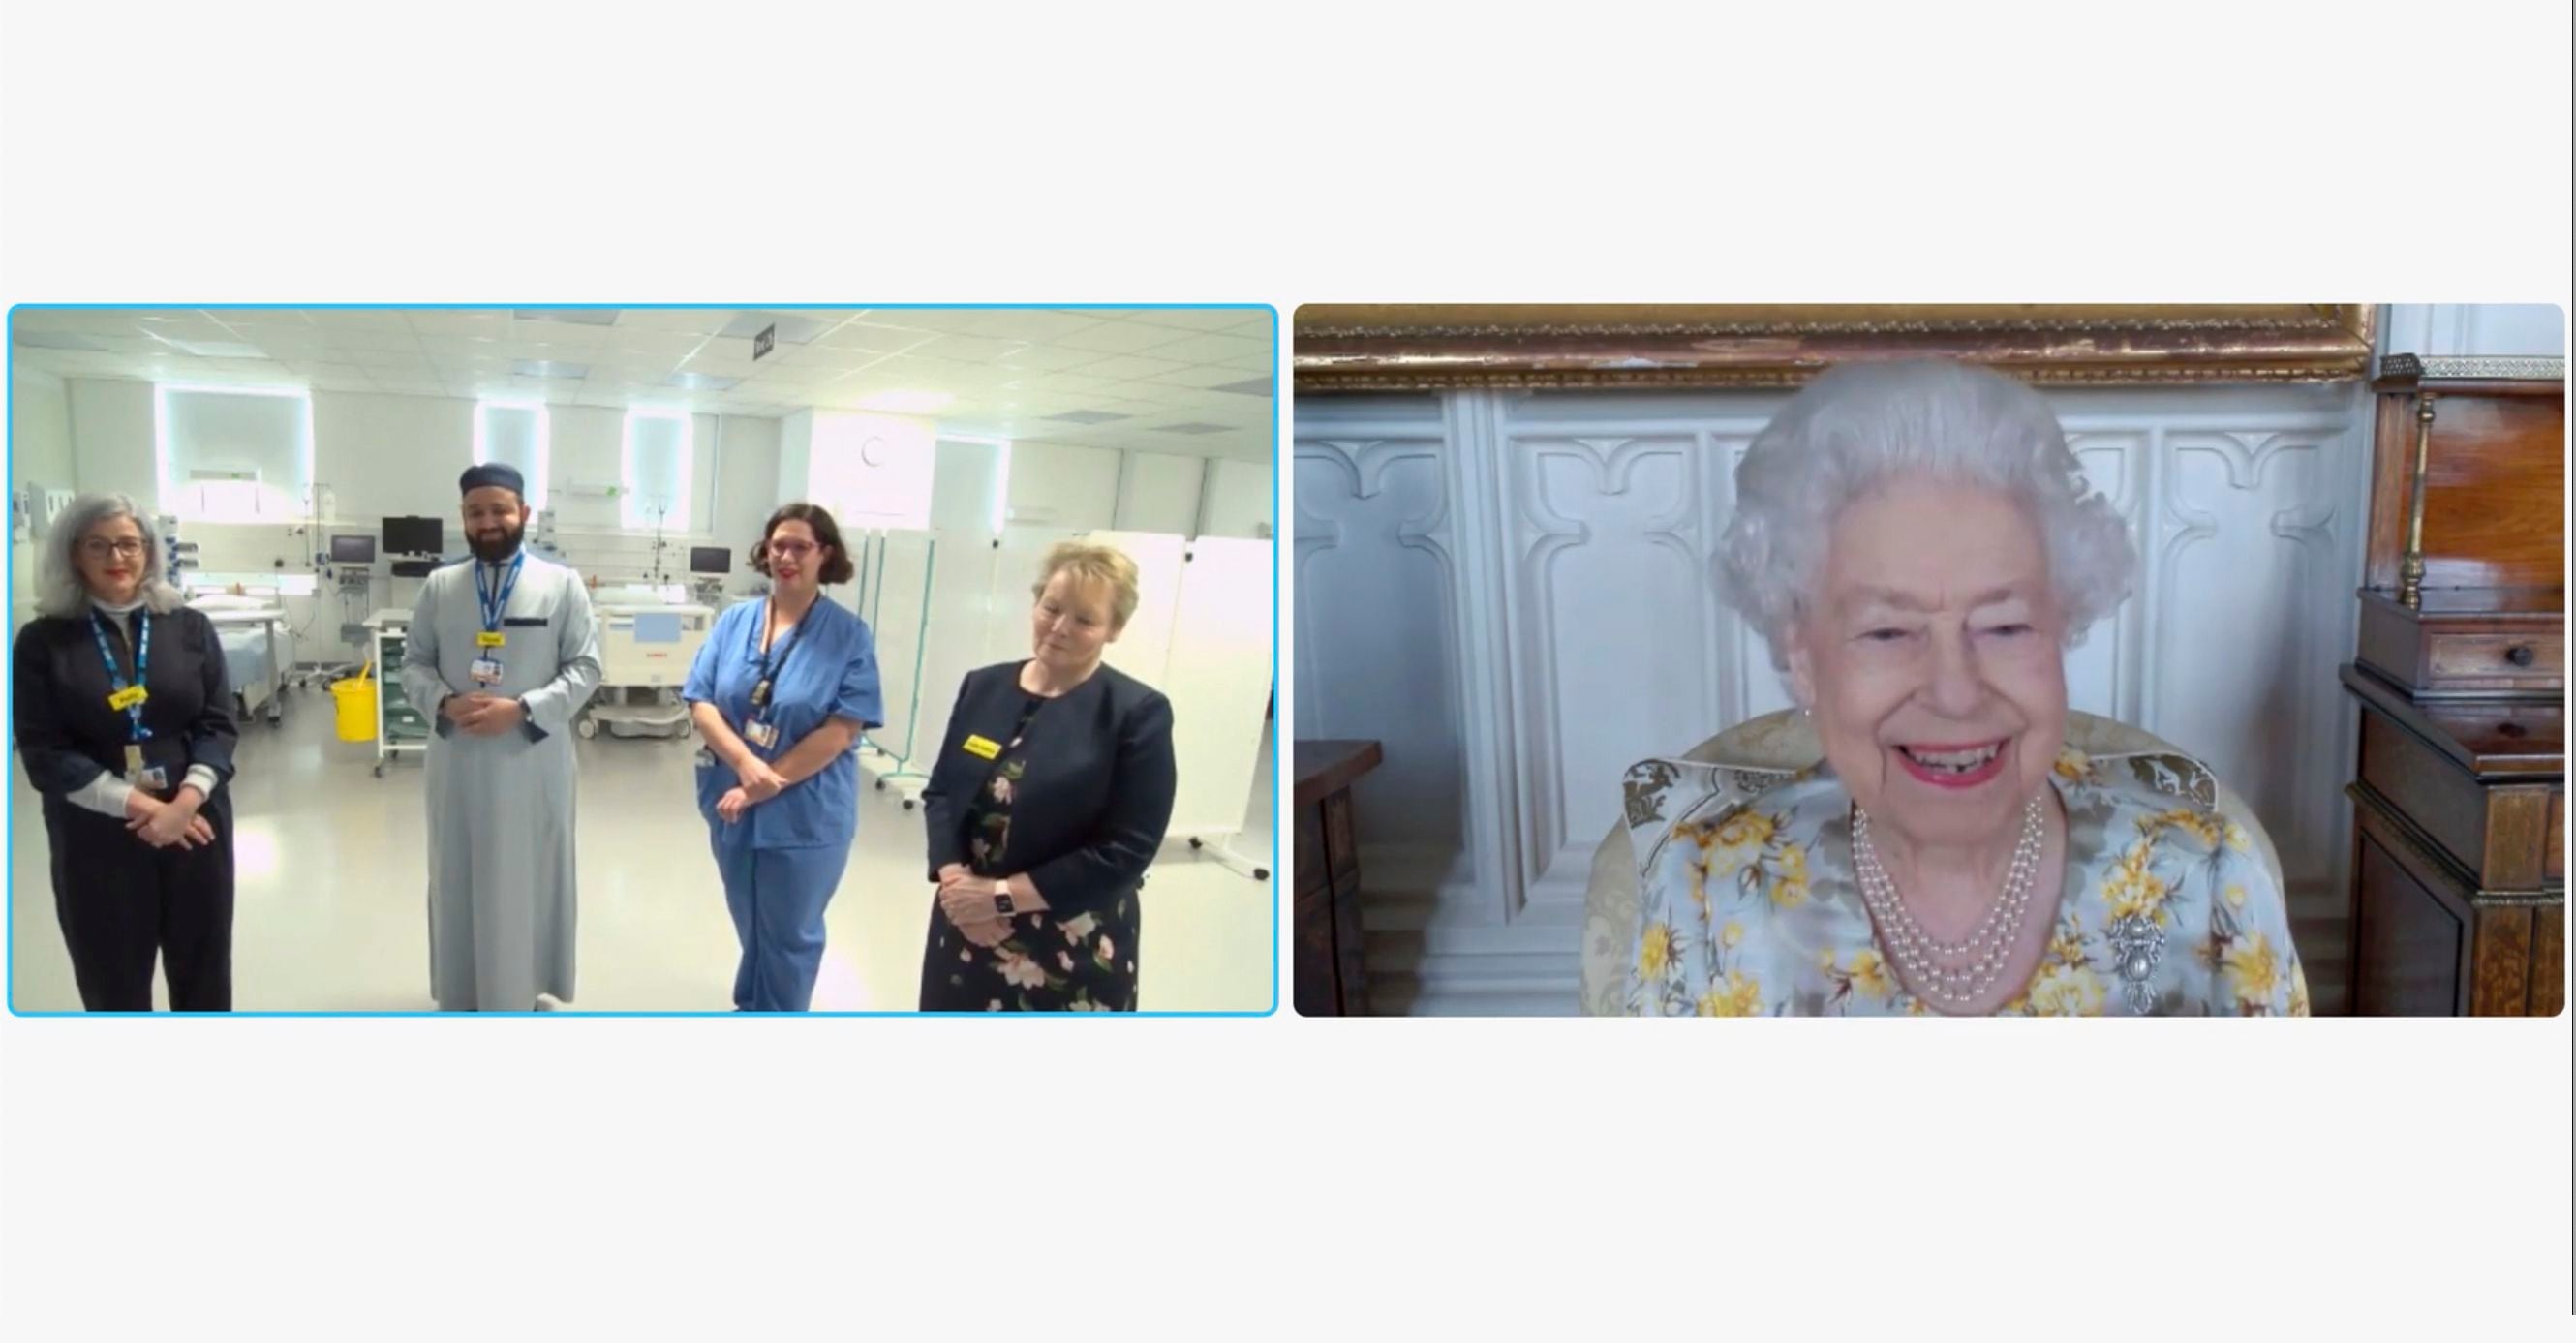 Queen chats with COVID-19 patients, nurses at UK hospital